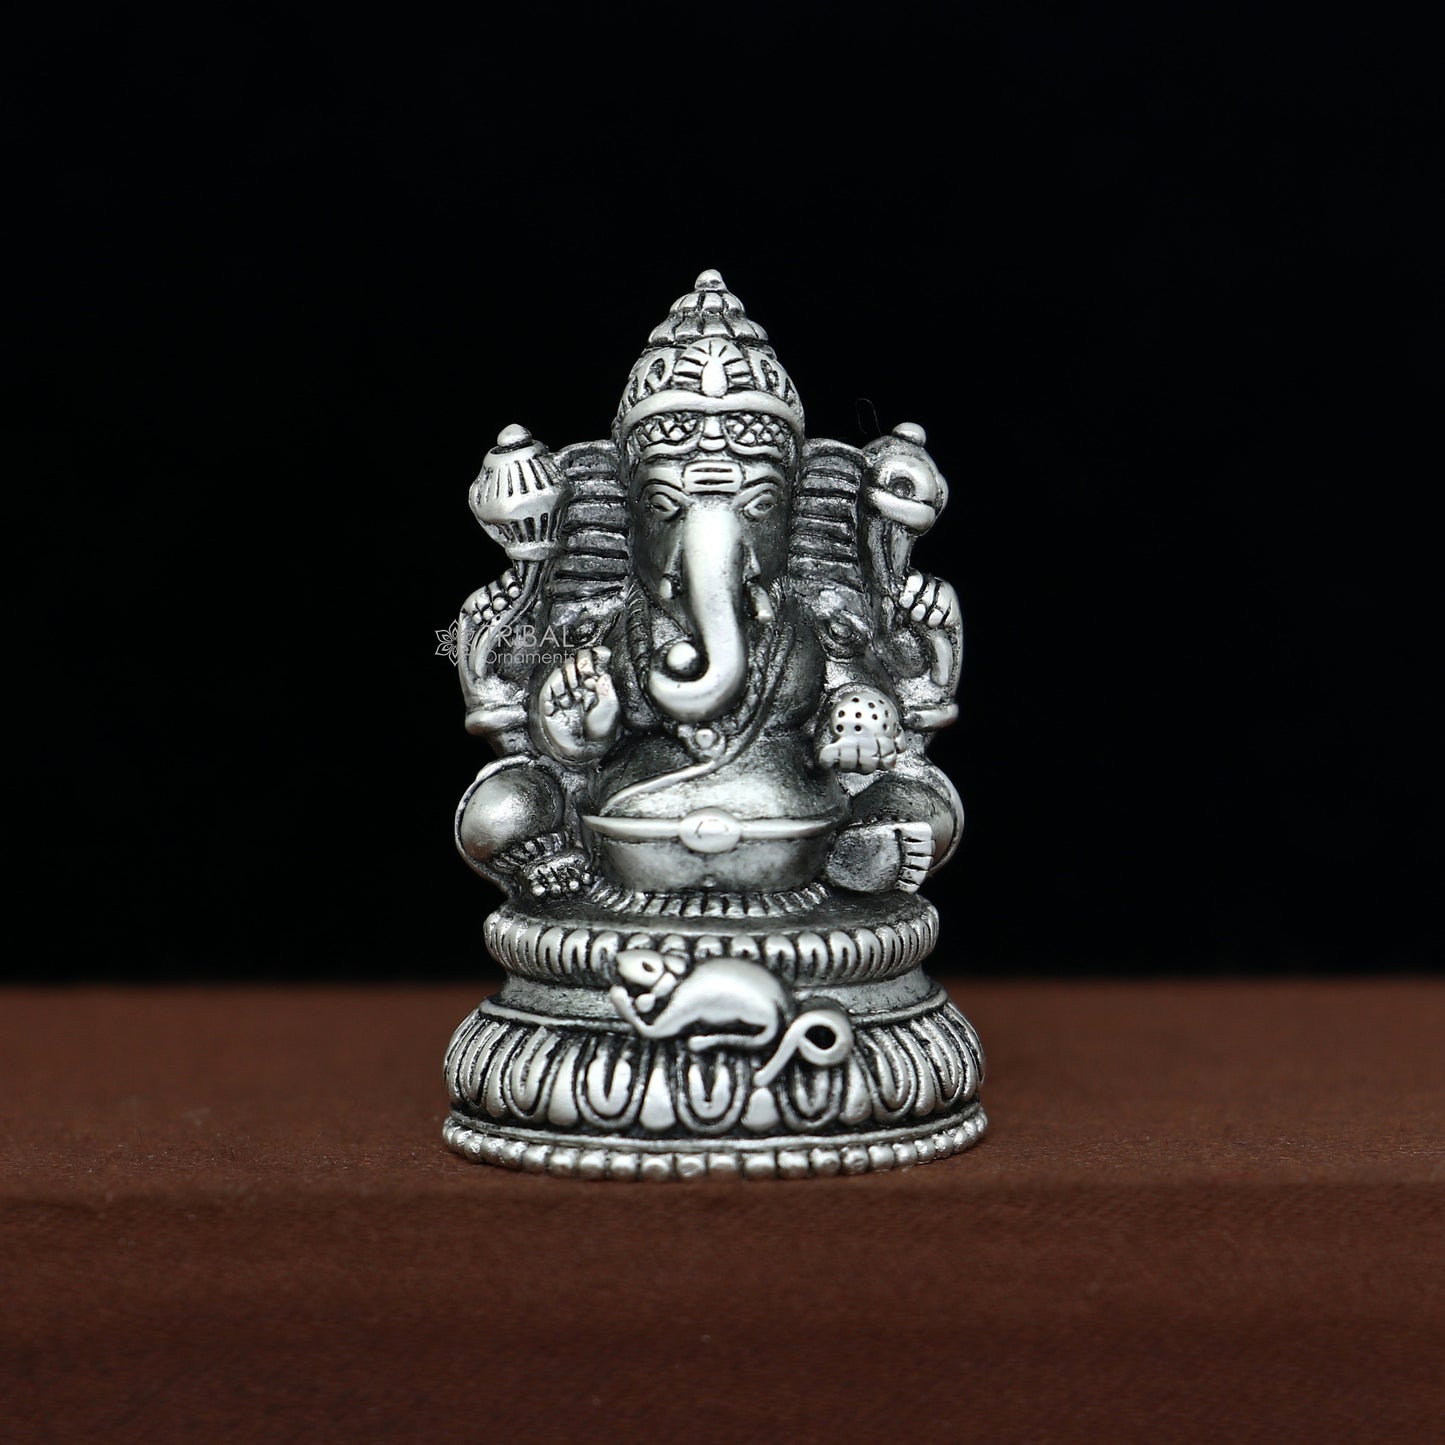 1.5" 925 Sterling silver lord Ganesha with mushak puja article figurine, Diwali puja Divine silver article of prosperity& wealth art716 - TRIBAL ORNAMENTS